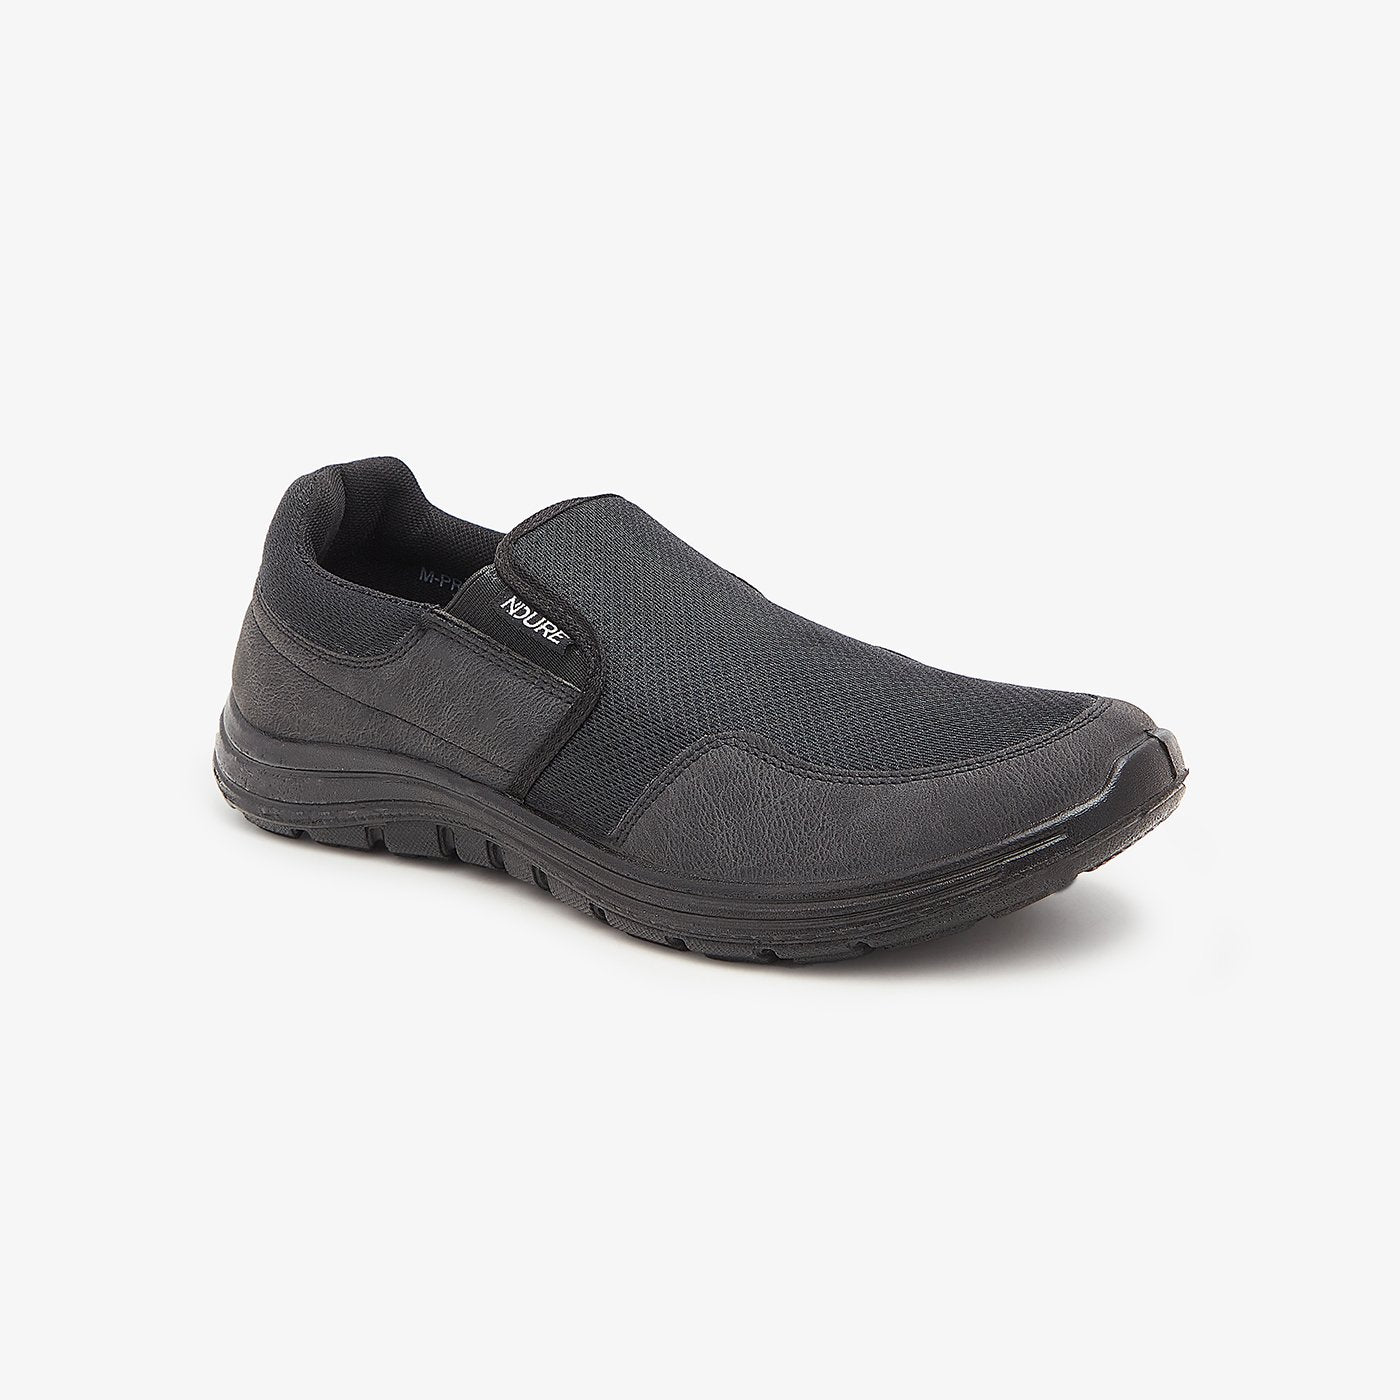 NDURE Athletic Shoes for Men